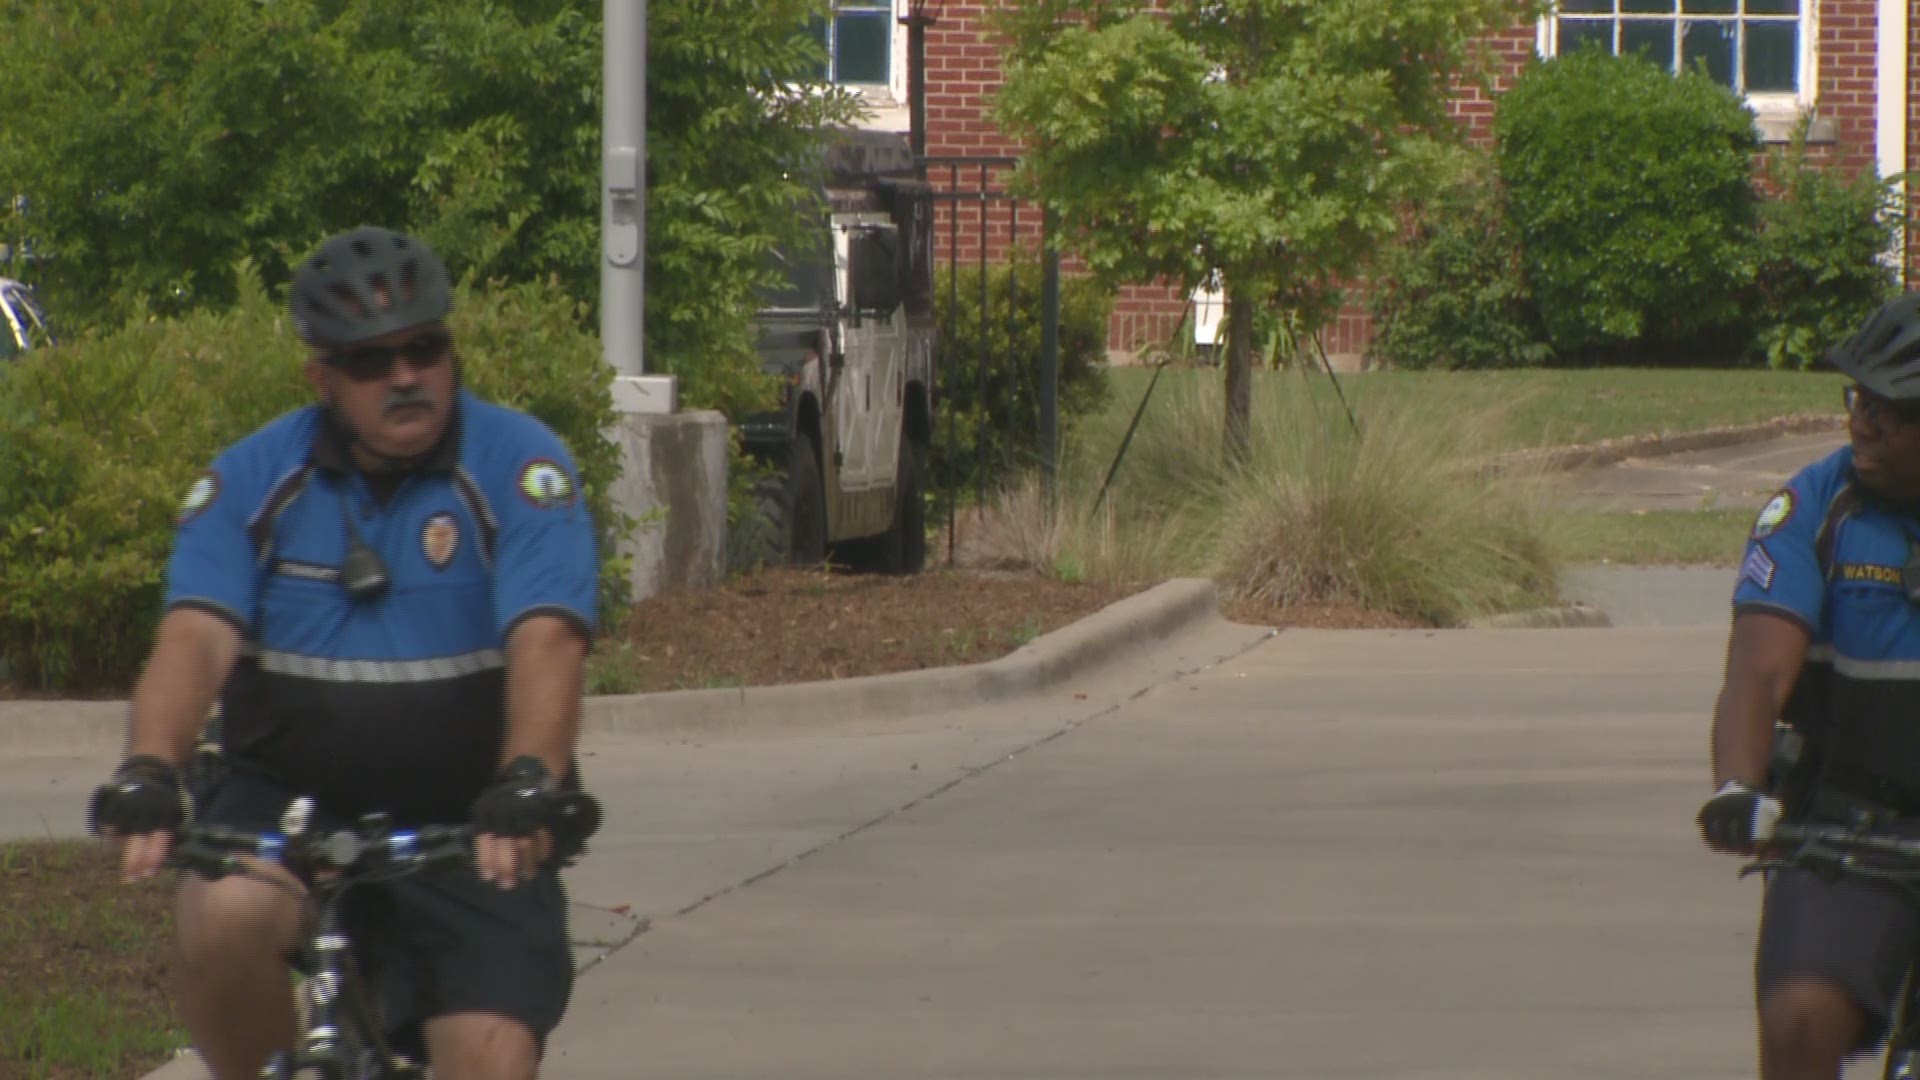 In the middle of last week, something happened to break the cycle of a rough few months for the Little Rock police. And it was broken by a man on a cycle.